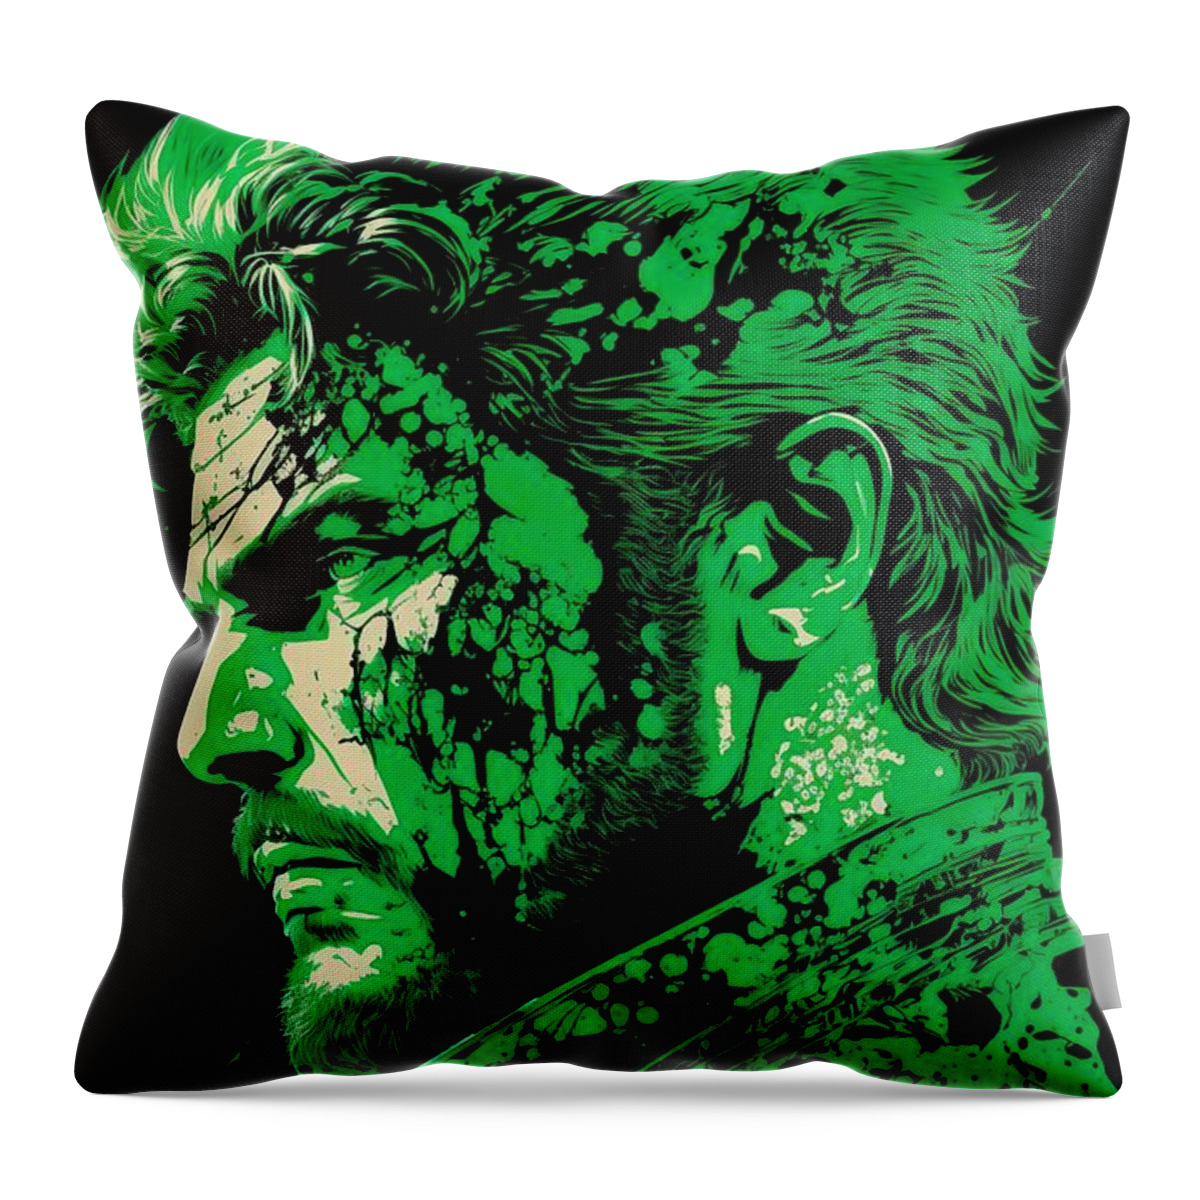 Mgs Throw Pillow featuring the digital art Snake by Luis Rodrigues